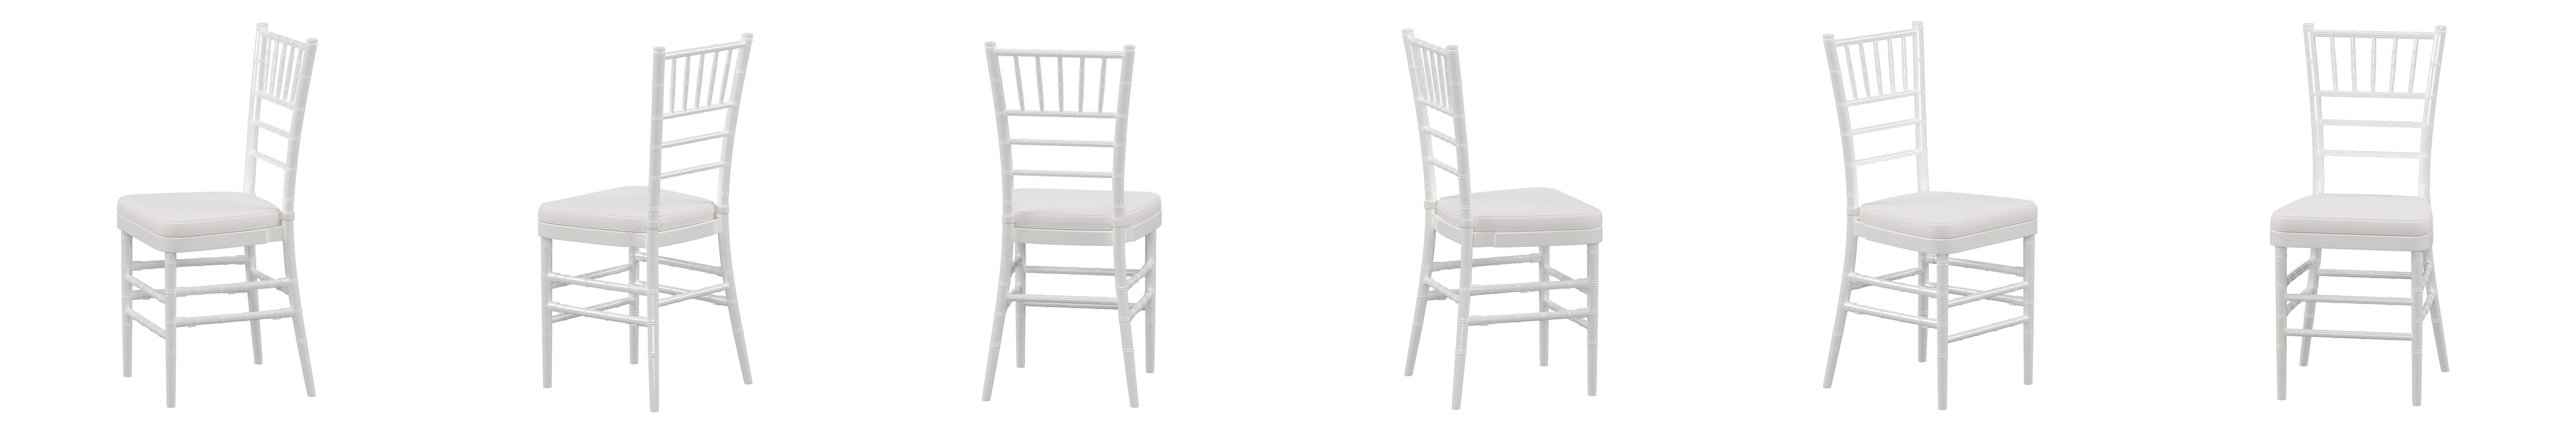 Fashionable Amazon: Safavieh Home Collection Carly Side Chair, White Intended For Carly Side Chairs (View 17 of 20)